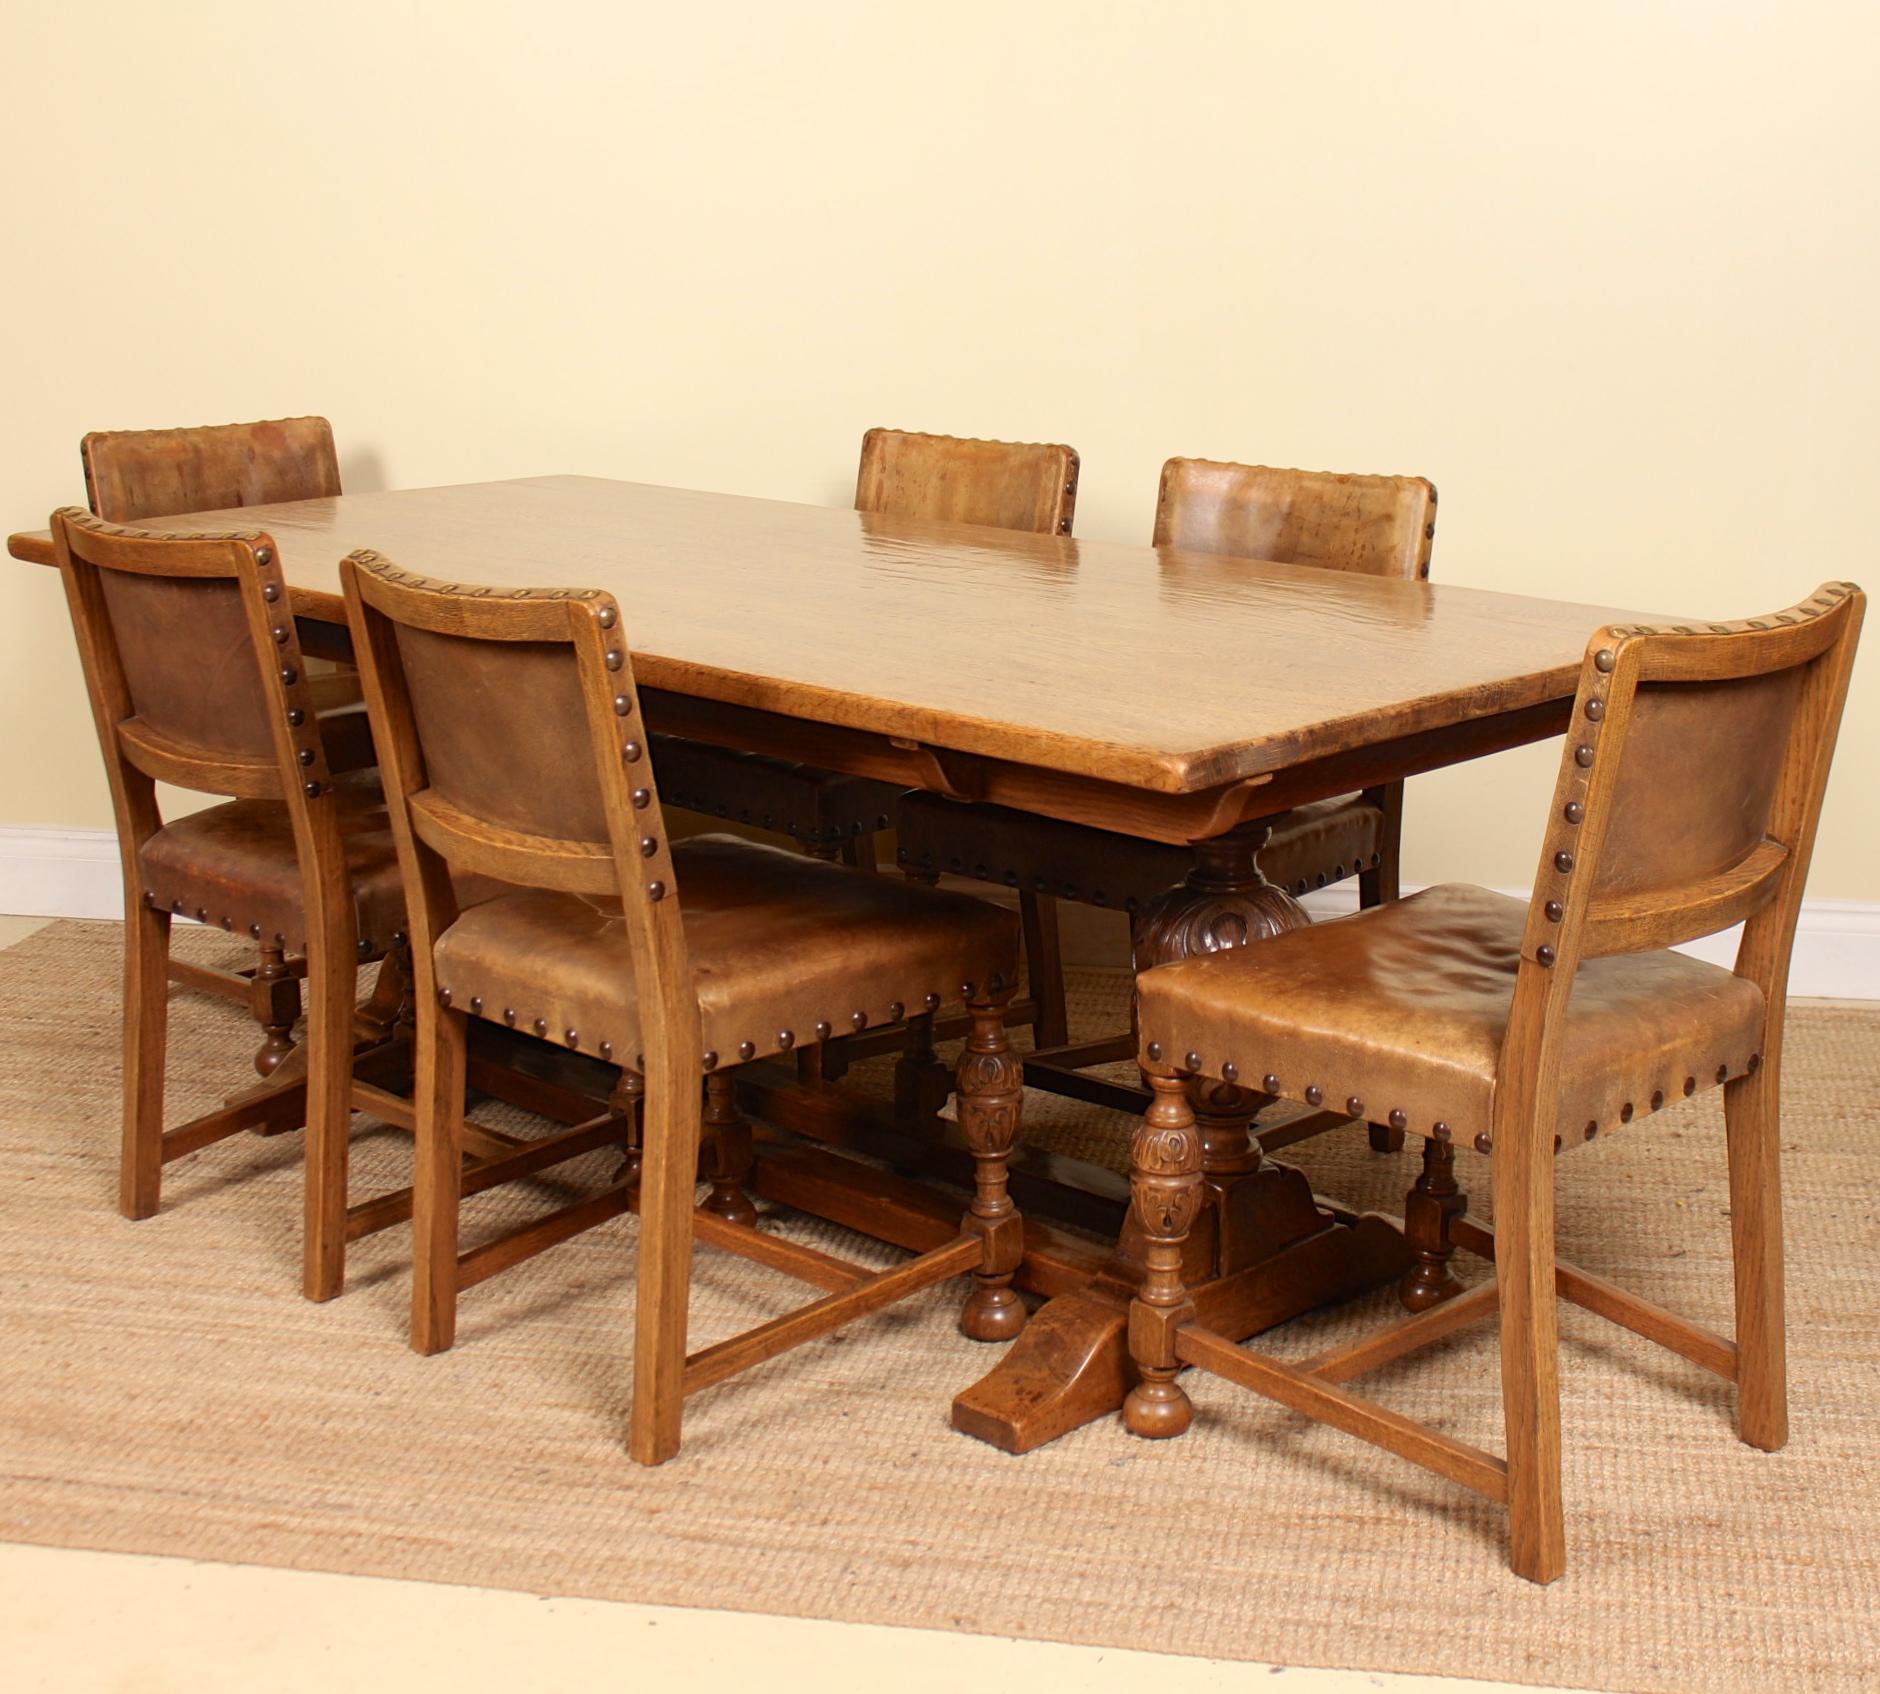 English Oak Refectory Dining Table and 6 Chairs Tan Leather In Good Condition For Sale In Newcastle upon Tyne, GB